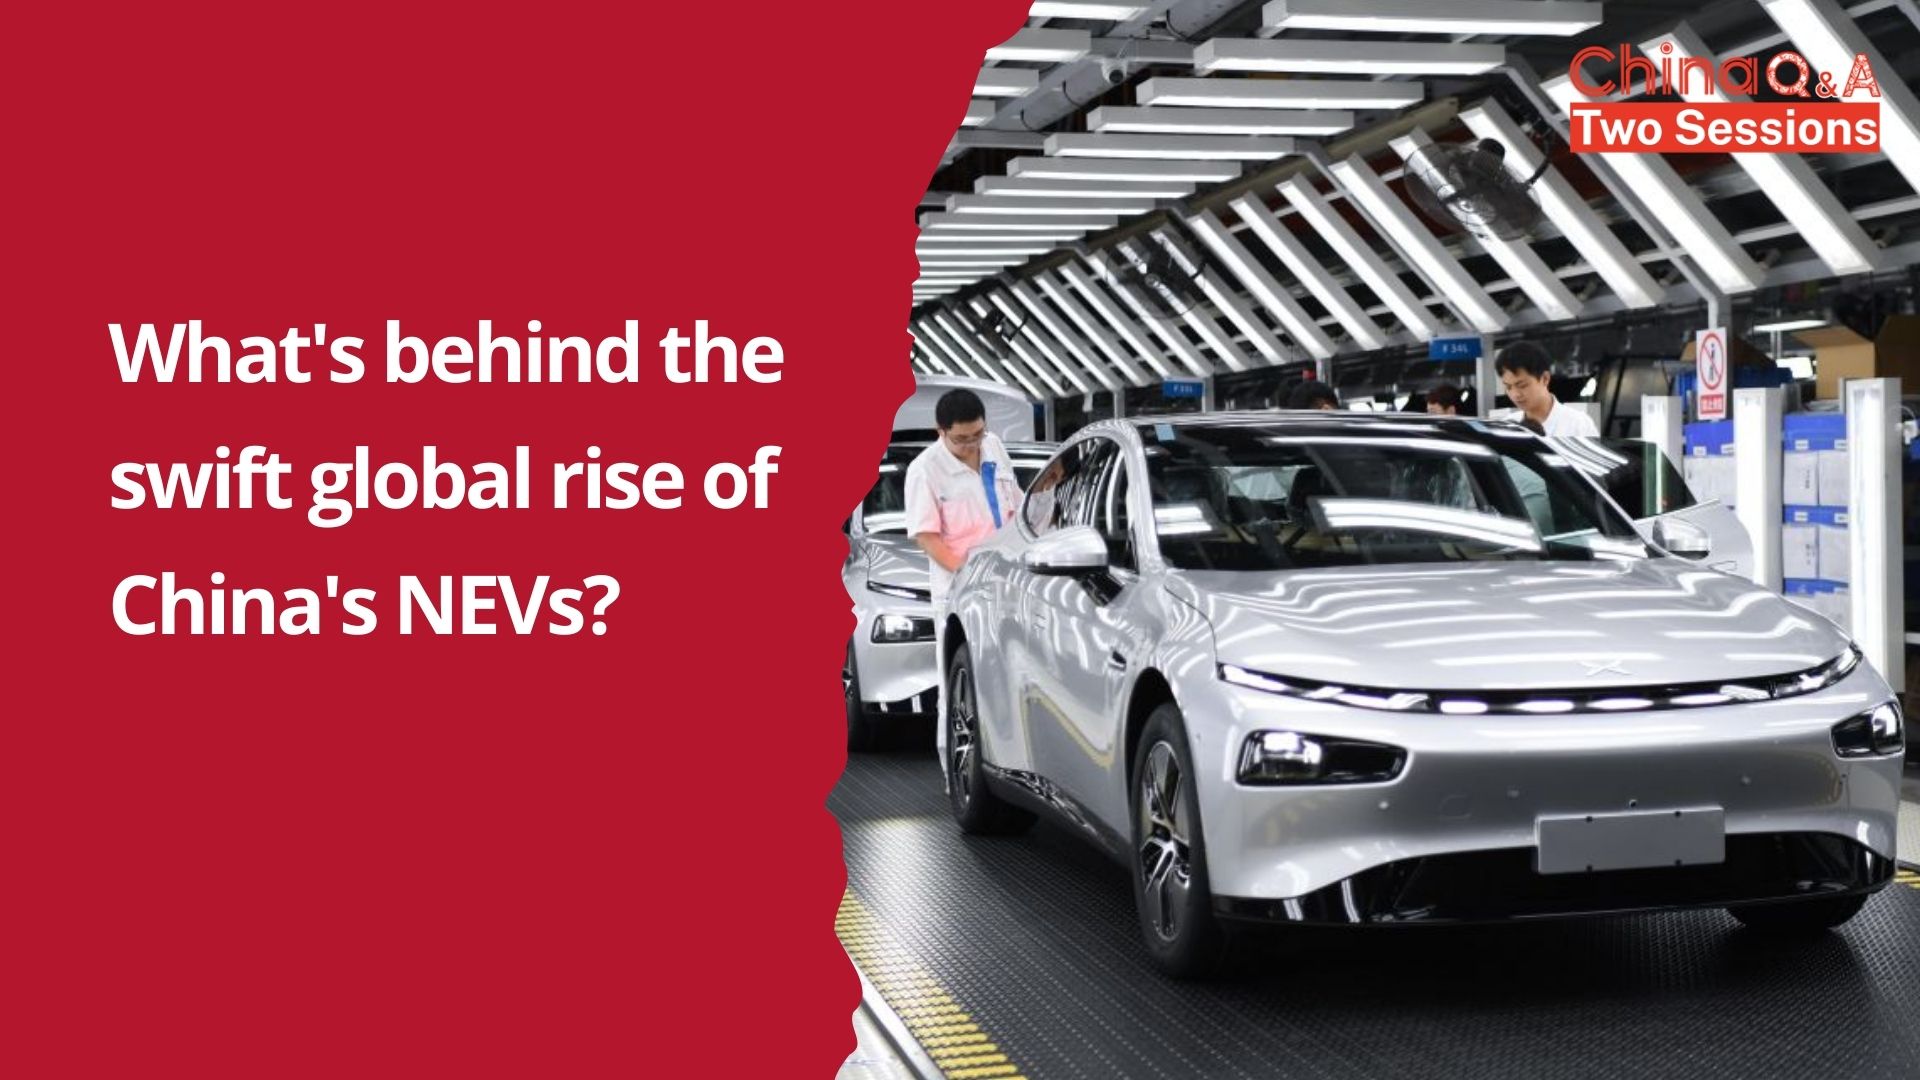 What's behind the swift global rise of China's NEVs?